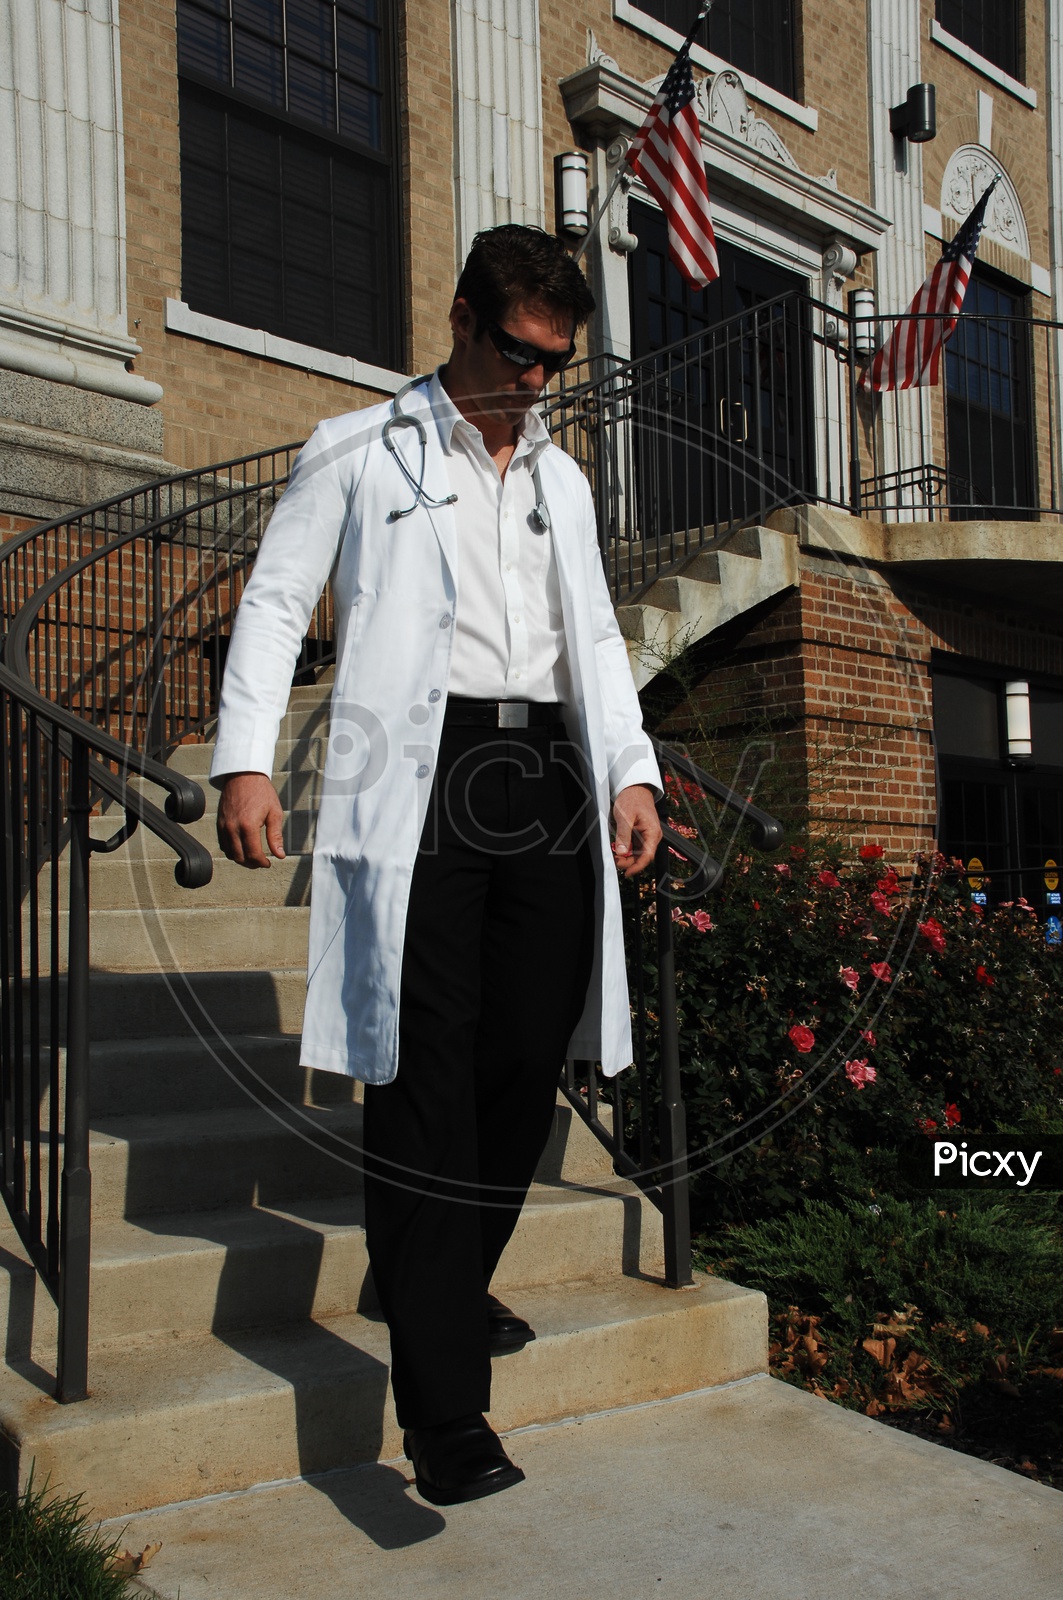 A male doctor wearing white coat with stethoscope walking down the staircase